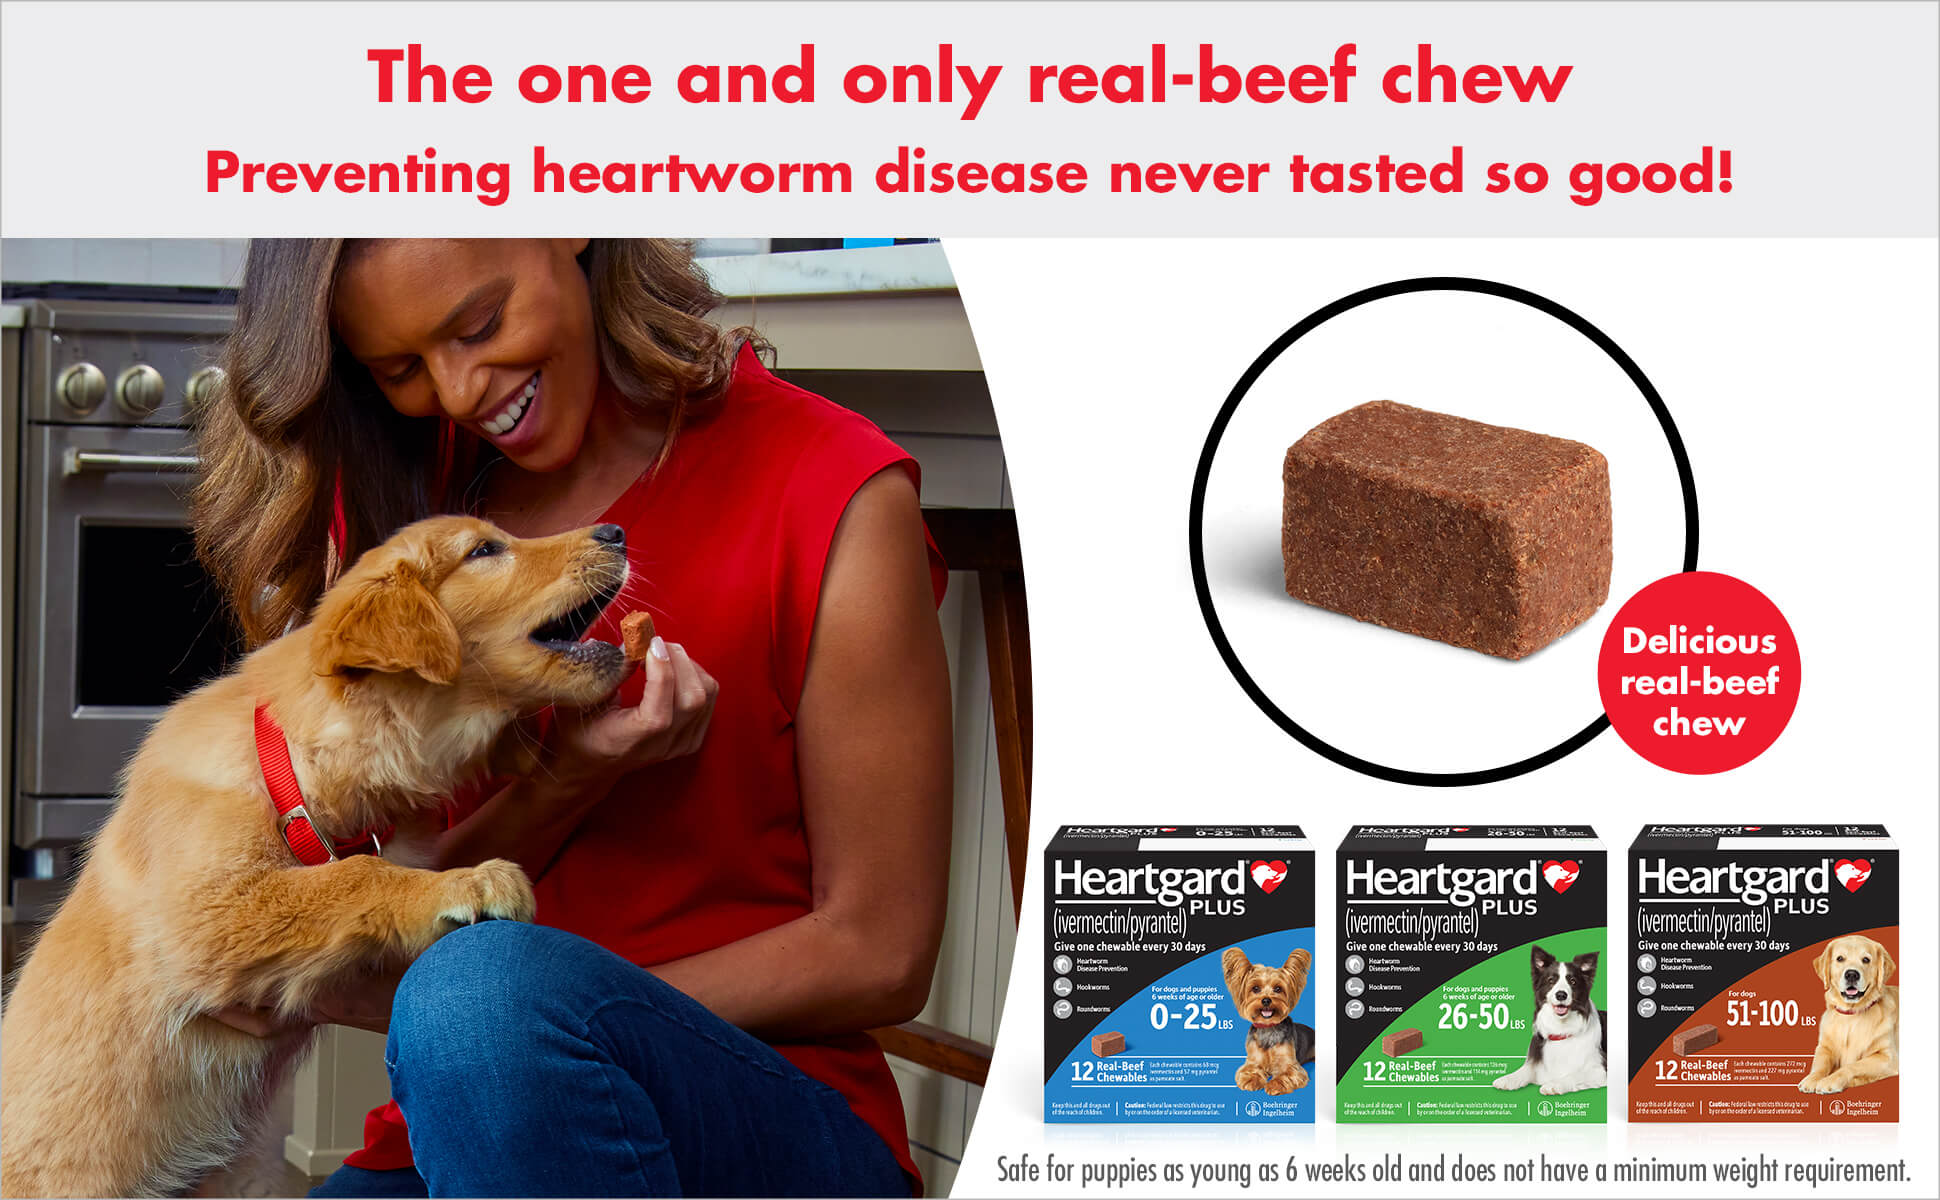 The one and only real-beef chew